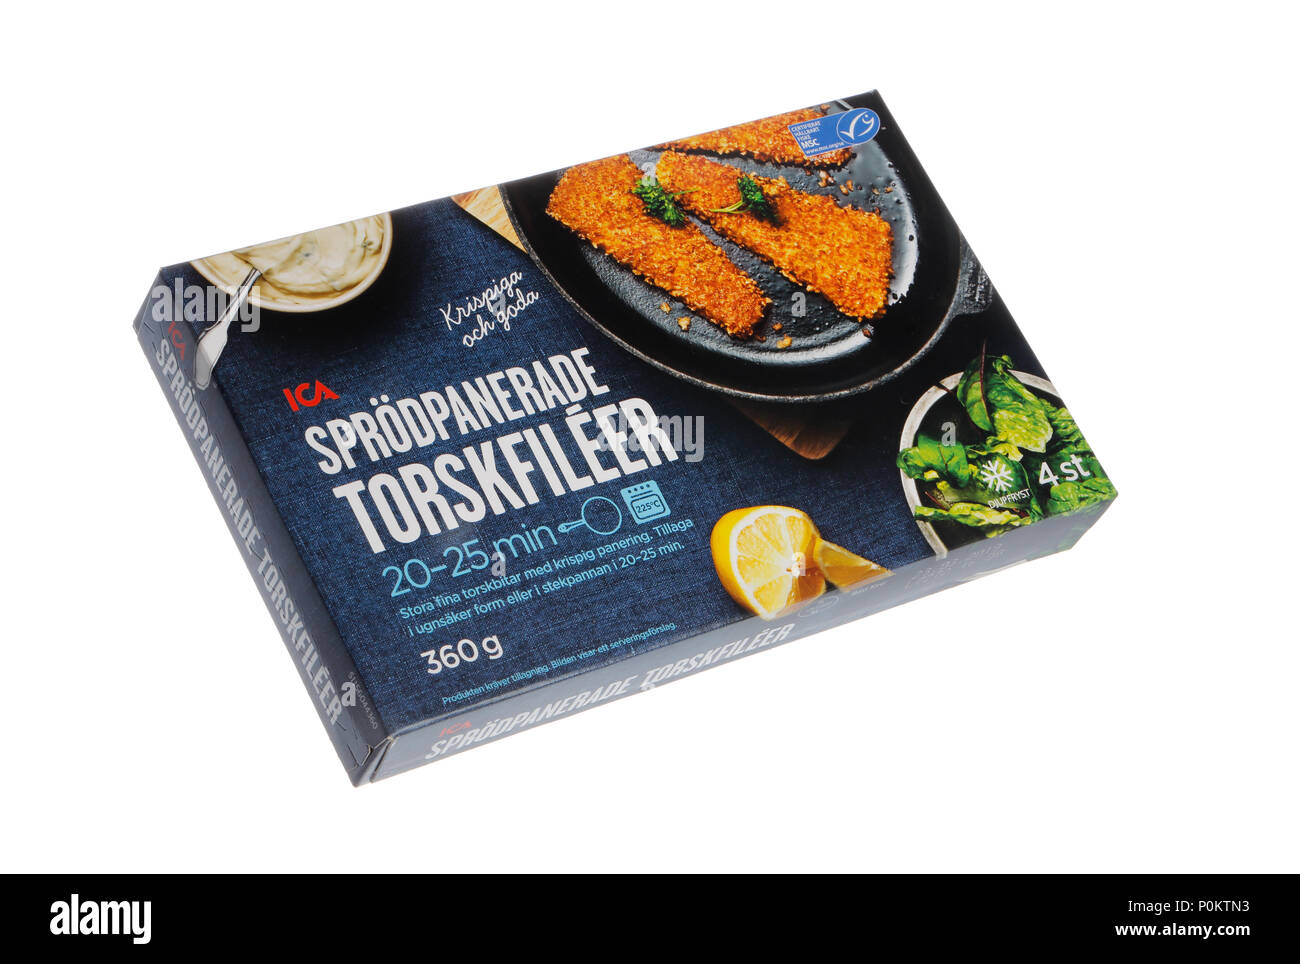 Stockholm, Sweden - February 2, 2018: Close up och one package of 360 grams ICA crispy cod fillets for the Swedish market as seen in shops in February Stock Photo